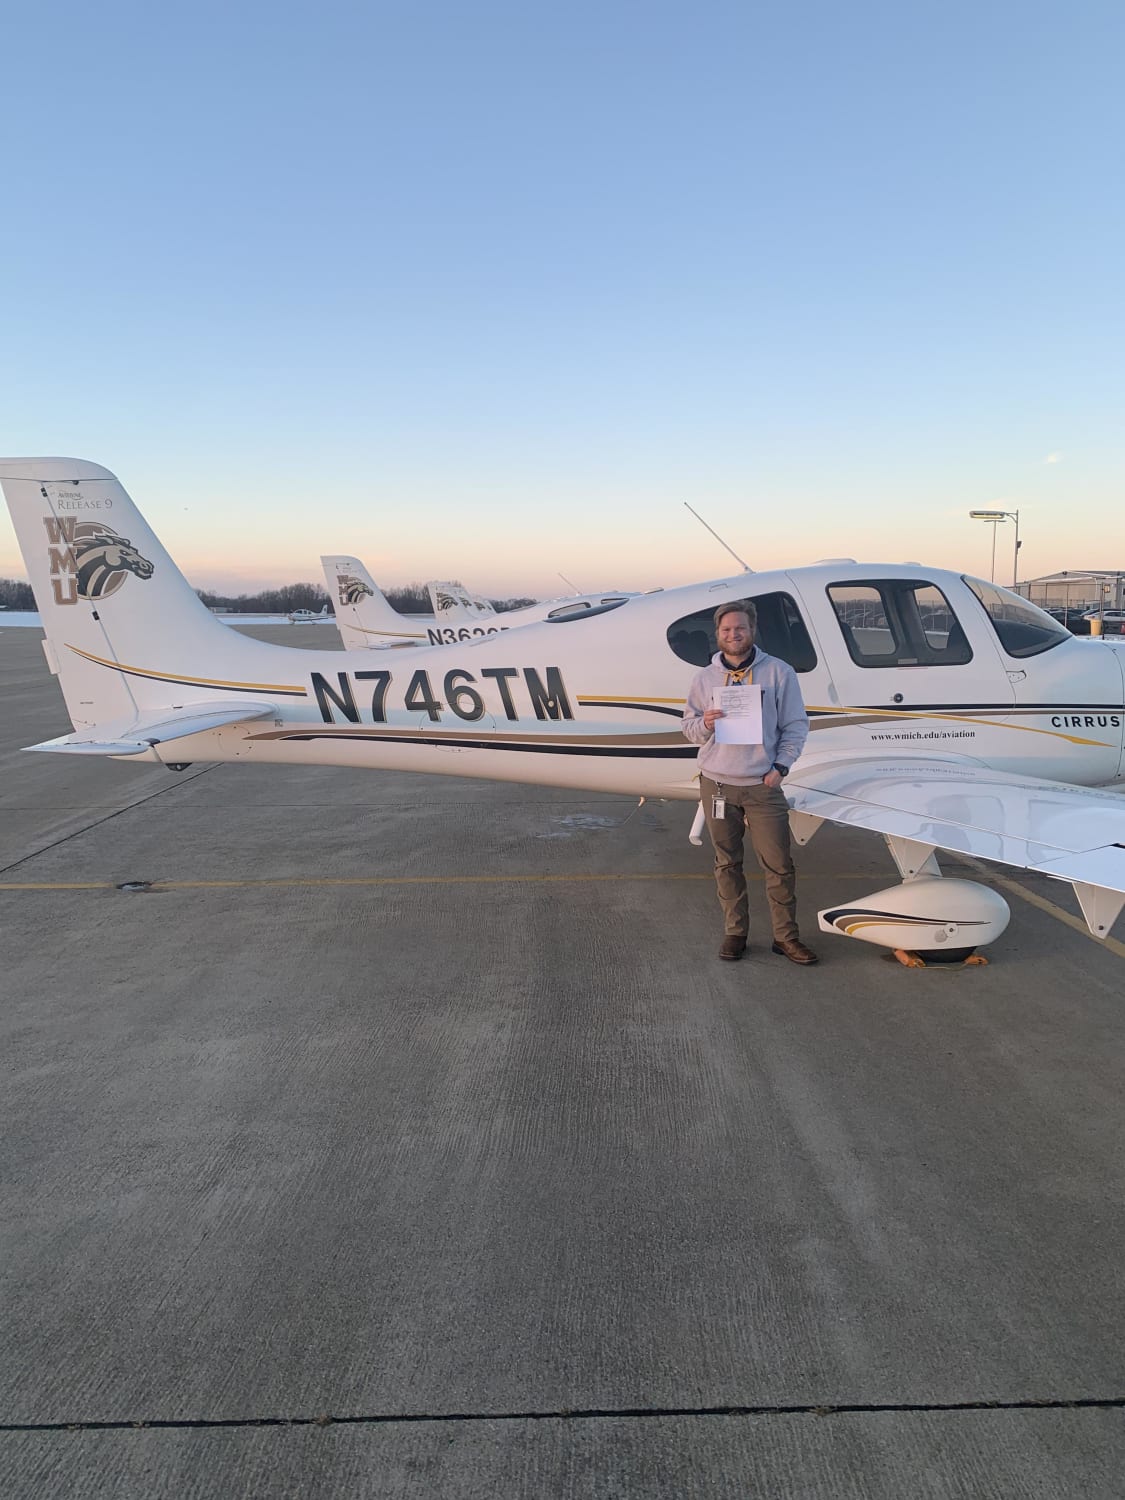 After 4.5 years, 150 hours, and some turbulence along the way, I finally became a private pilot!